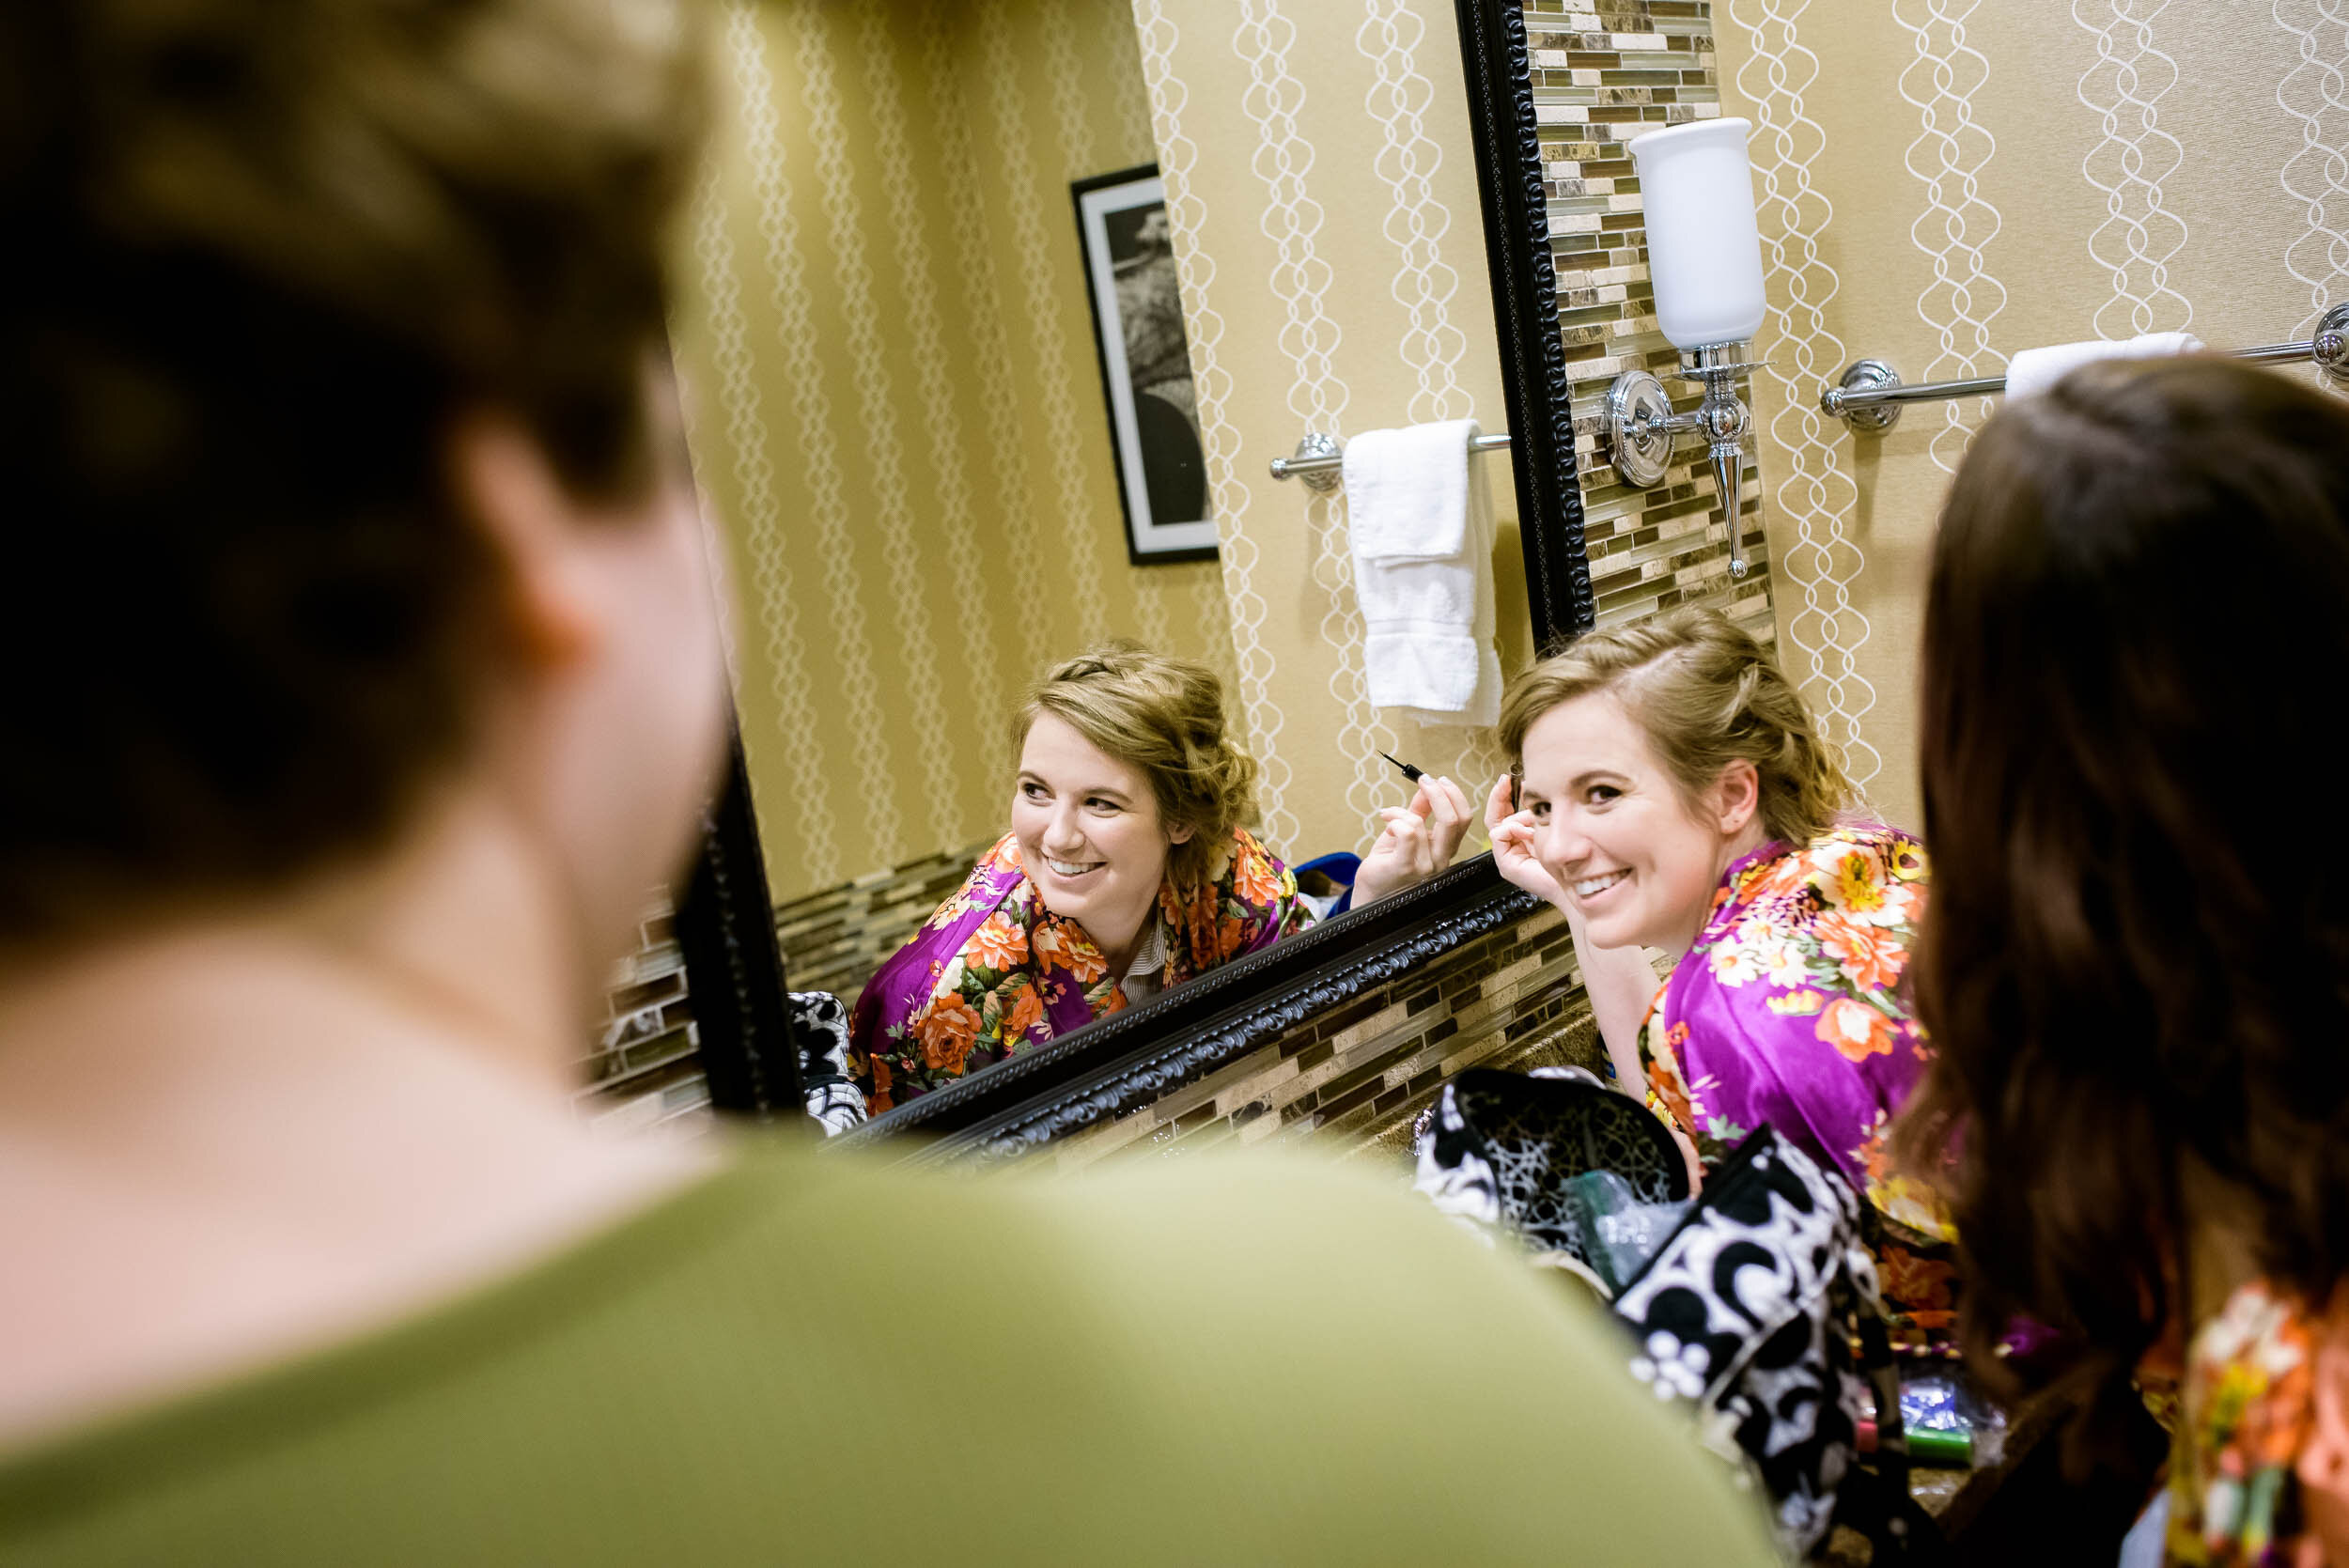 Bride getting ready on her wedding day: Columbus Park Refectory wedding captured by J. Brown Photography.